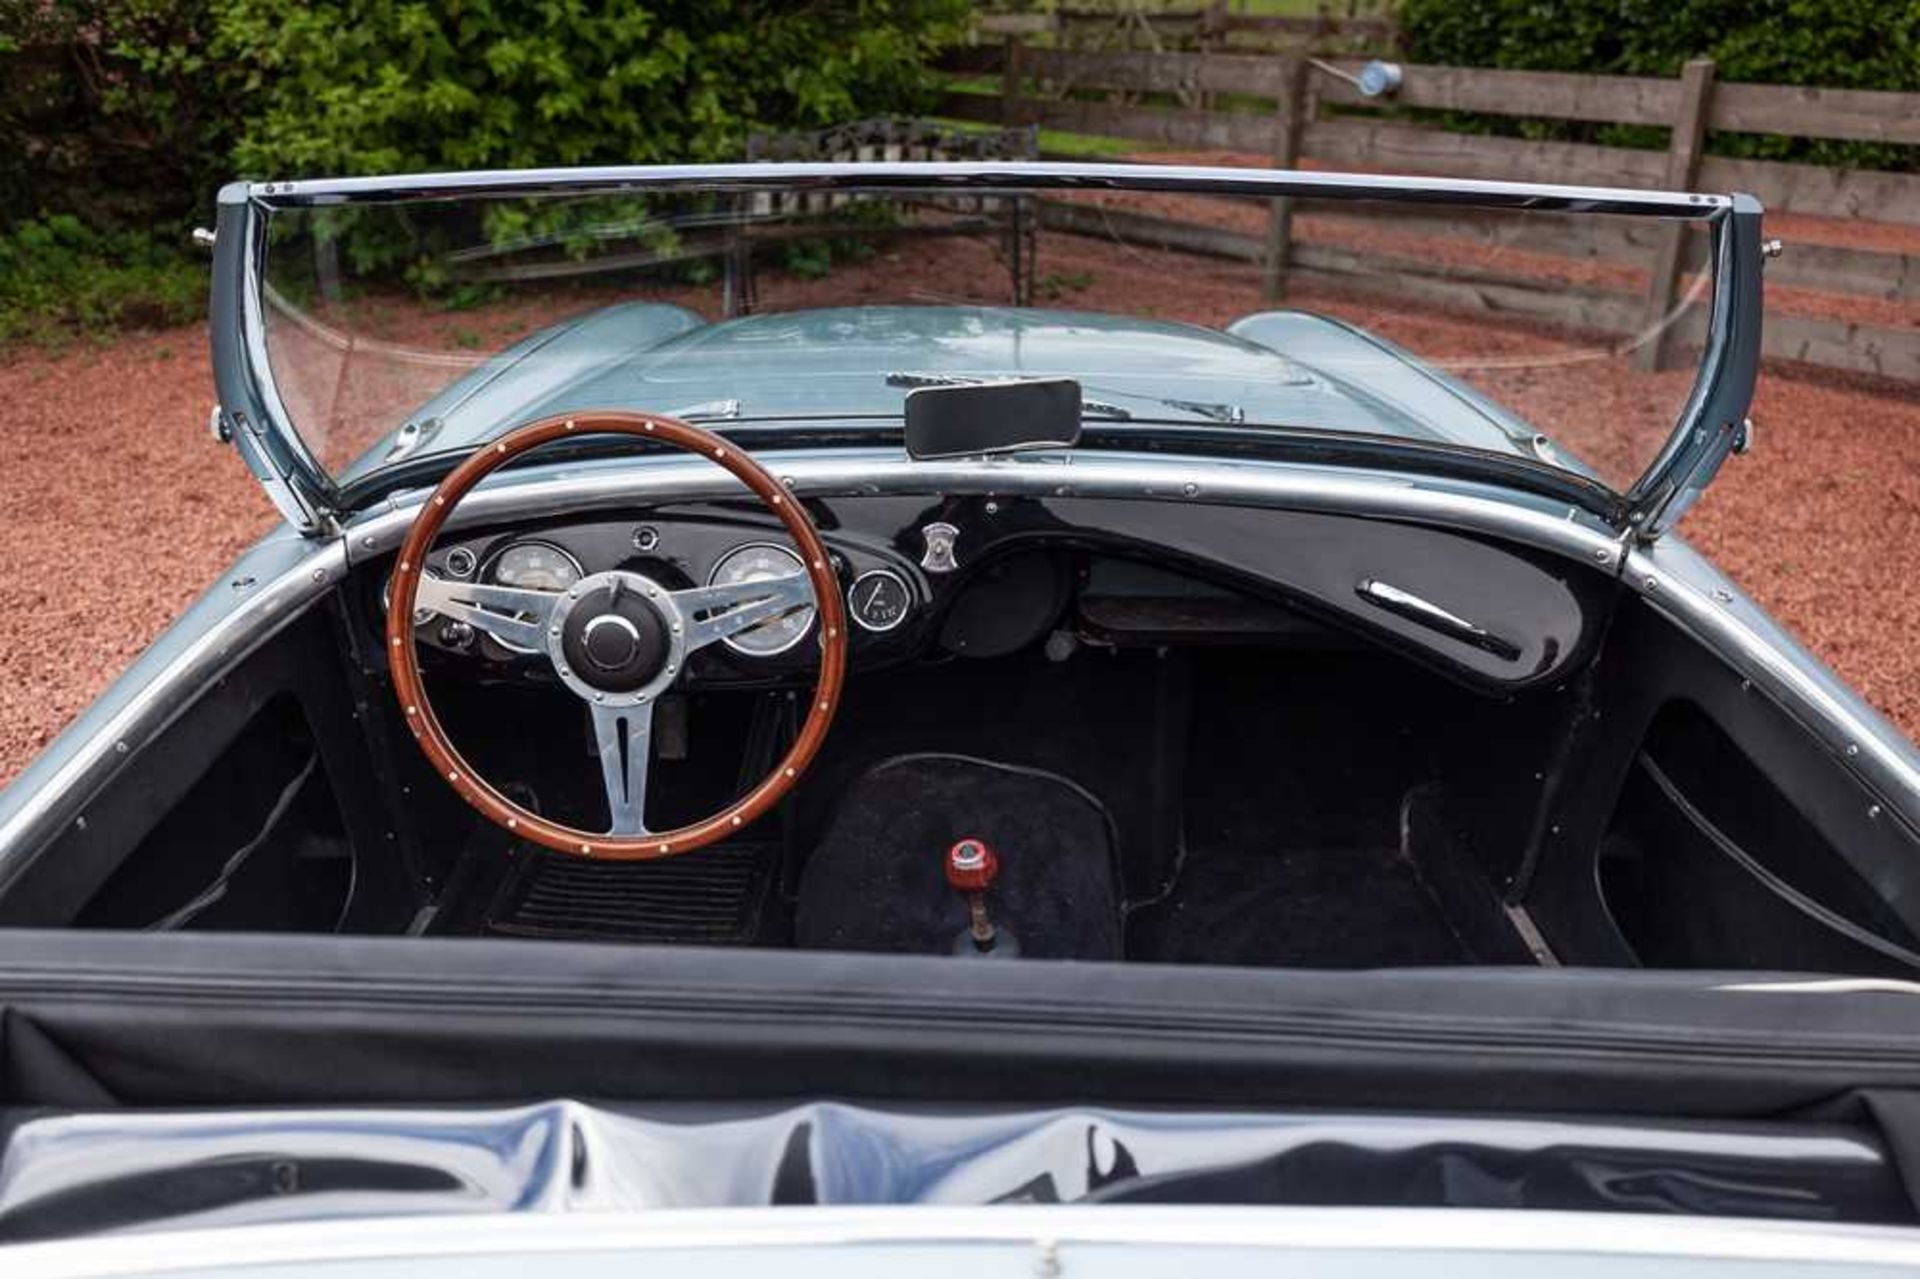 1955 Austin-Healey 100/4 Subtly Upgraded with 5-Speed Transmission and Front Disc Brakes - Image 31 of 54